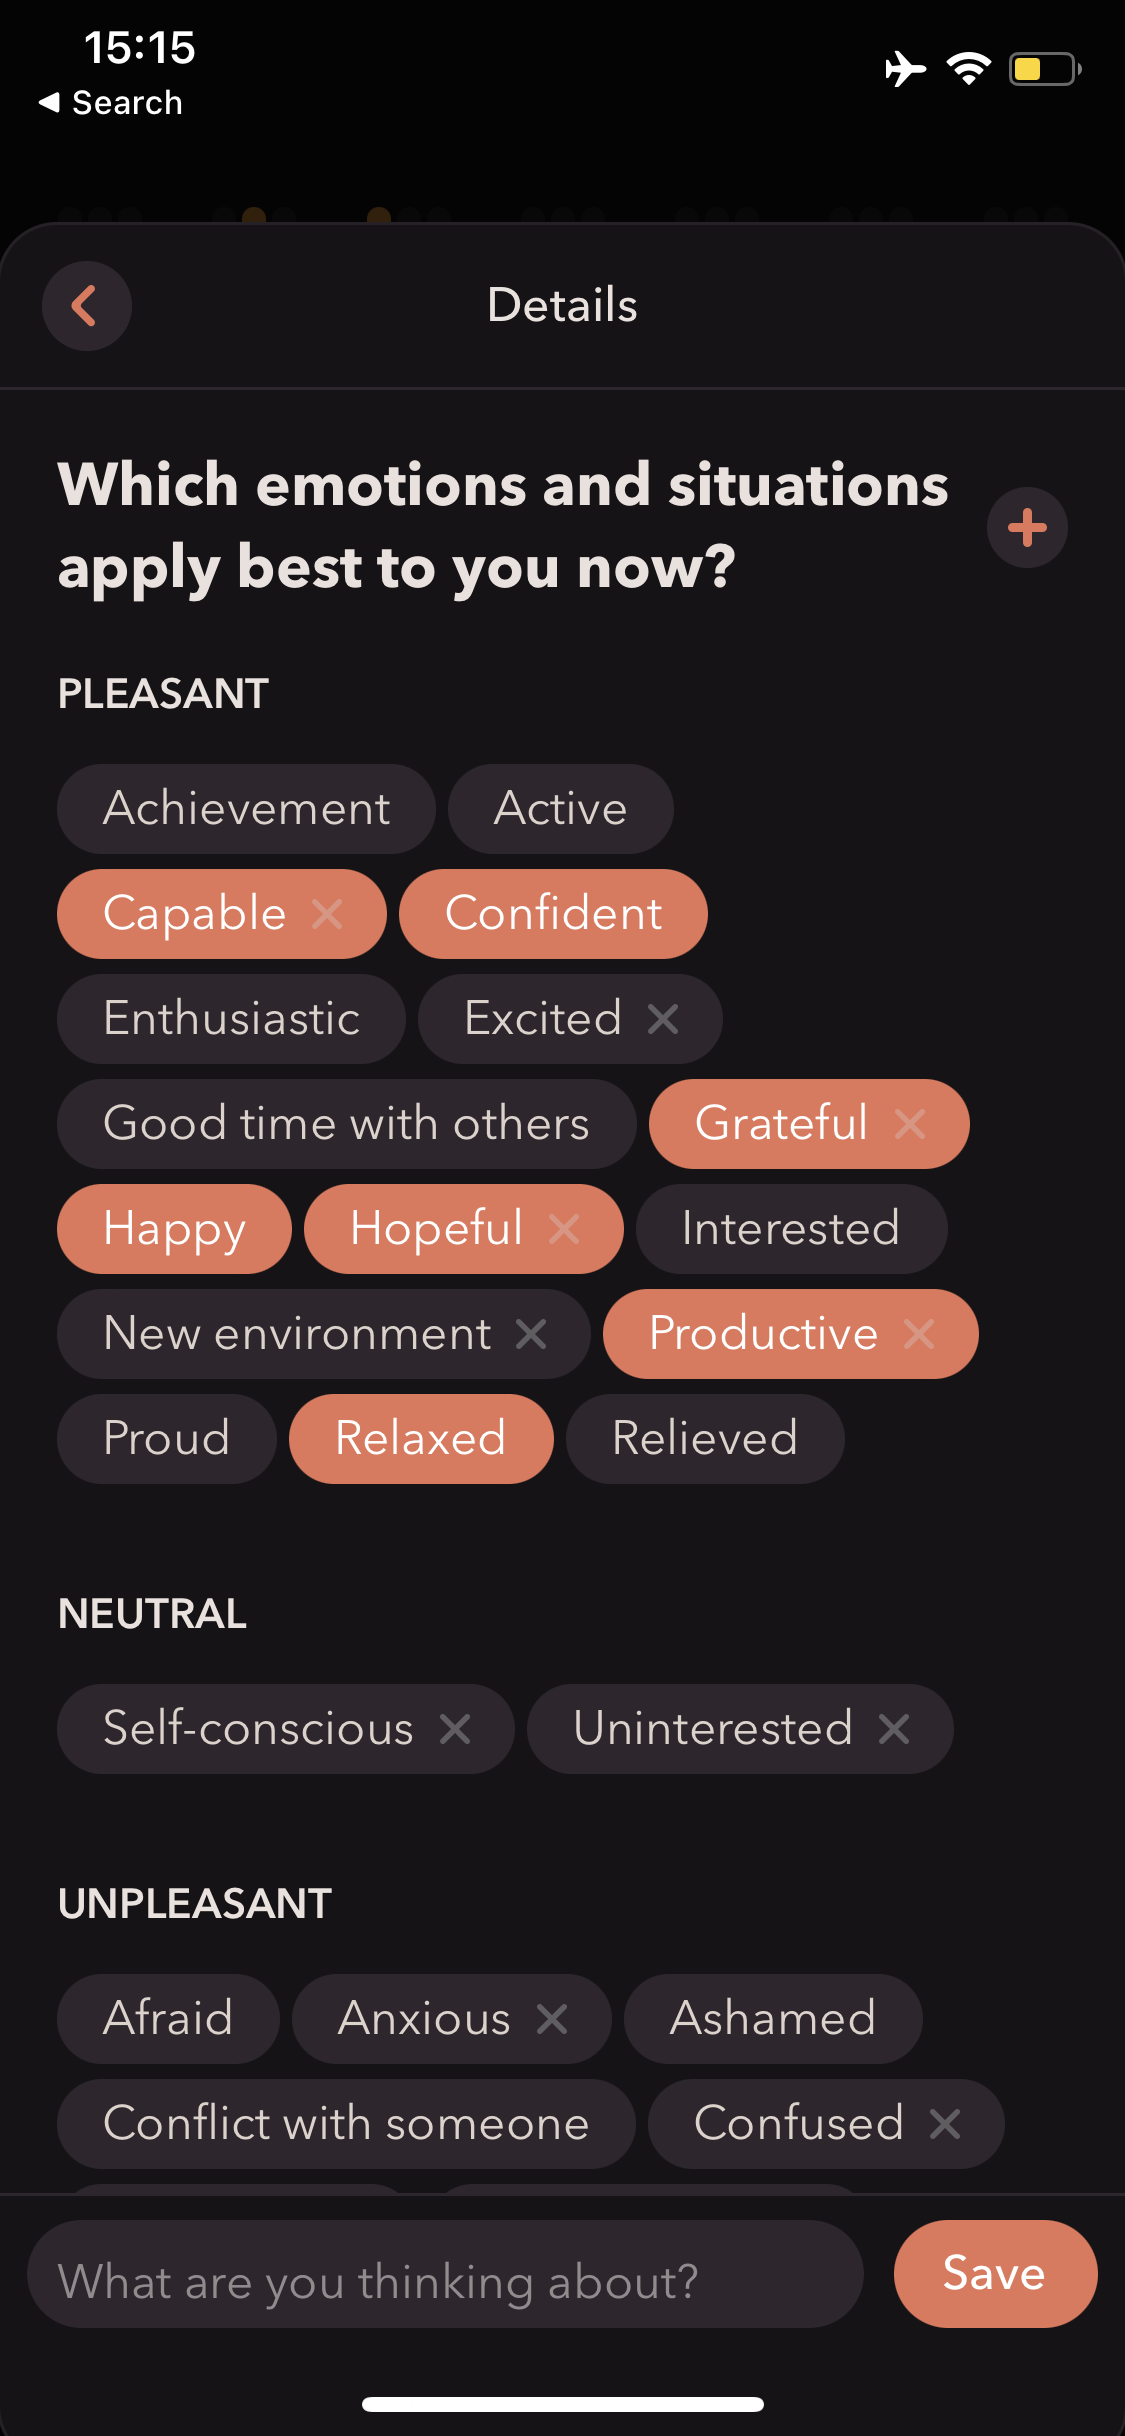  MindDoc allows you to customize and add emotions and situations you would categorize as pleasant, neutral, or unpleasant (Part 1) 